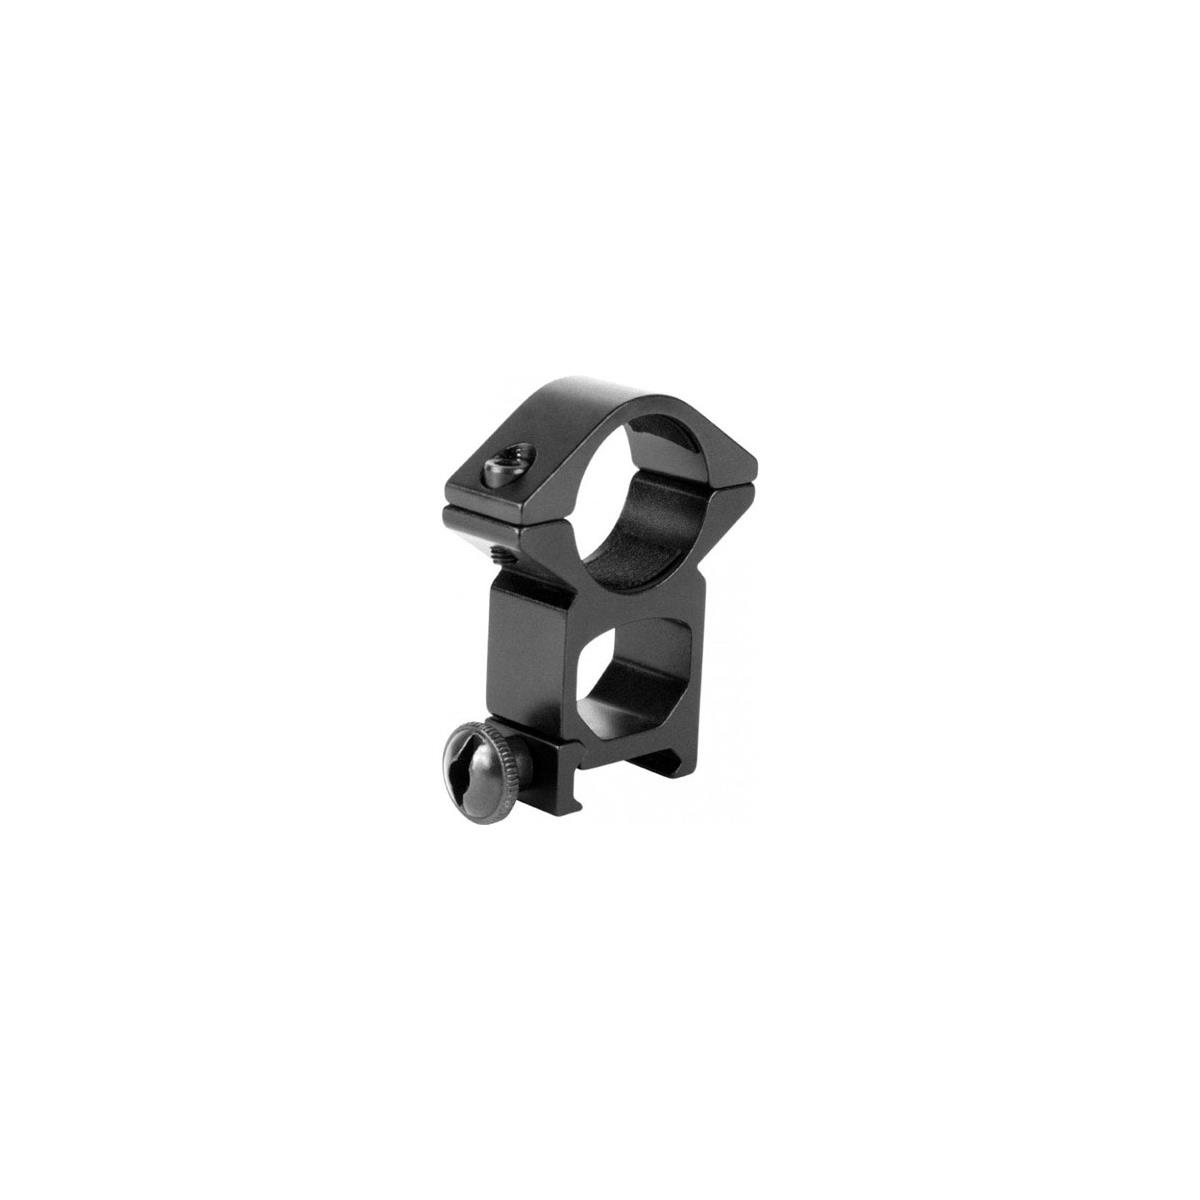 

AIM Sports Aim Sports 1" Rings with Weaver Base Mount, High Profile, One Pair